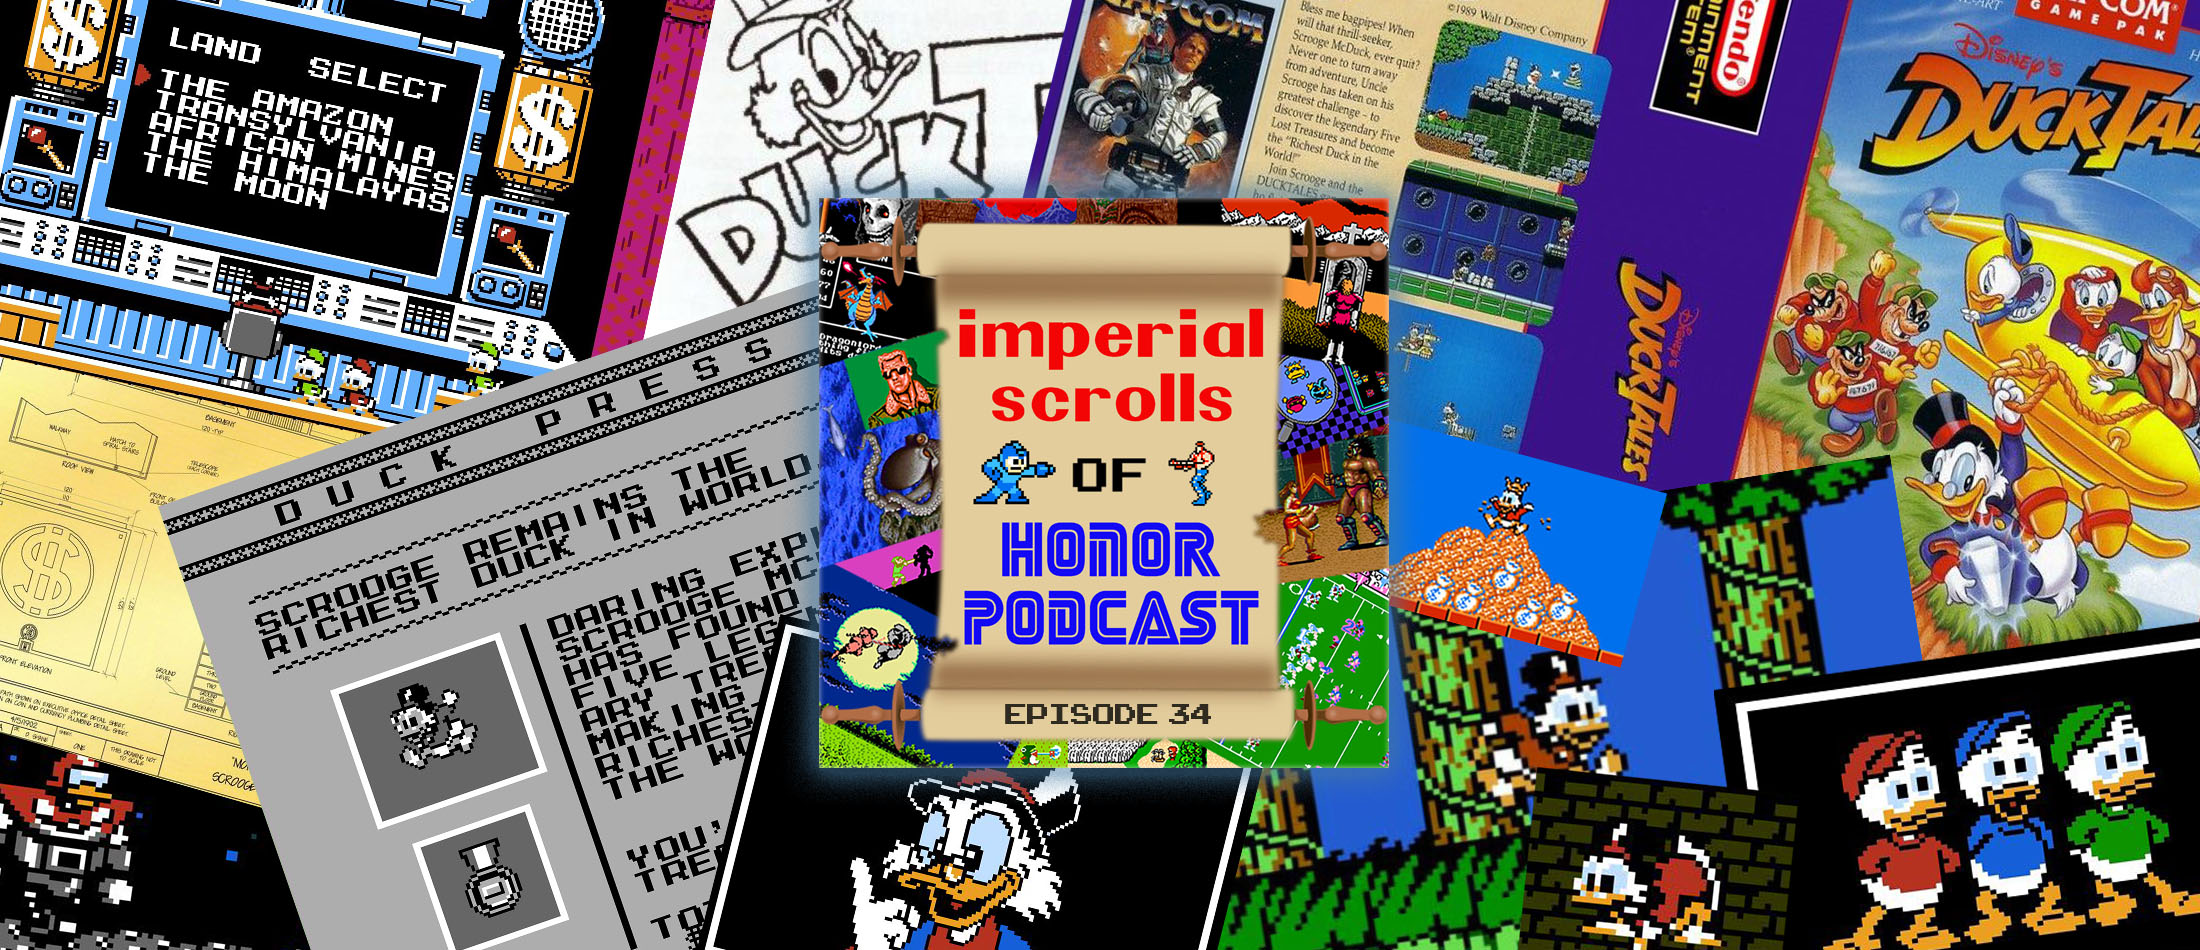 Imperial Scrolls of Honor Podcast - Episode 34 - DuckTales